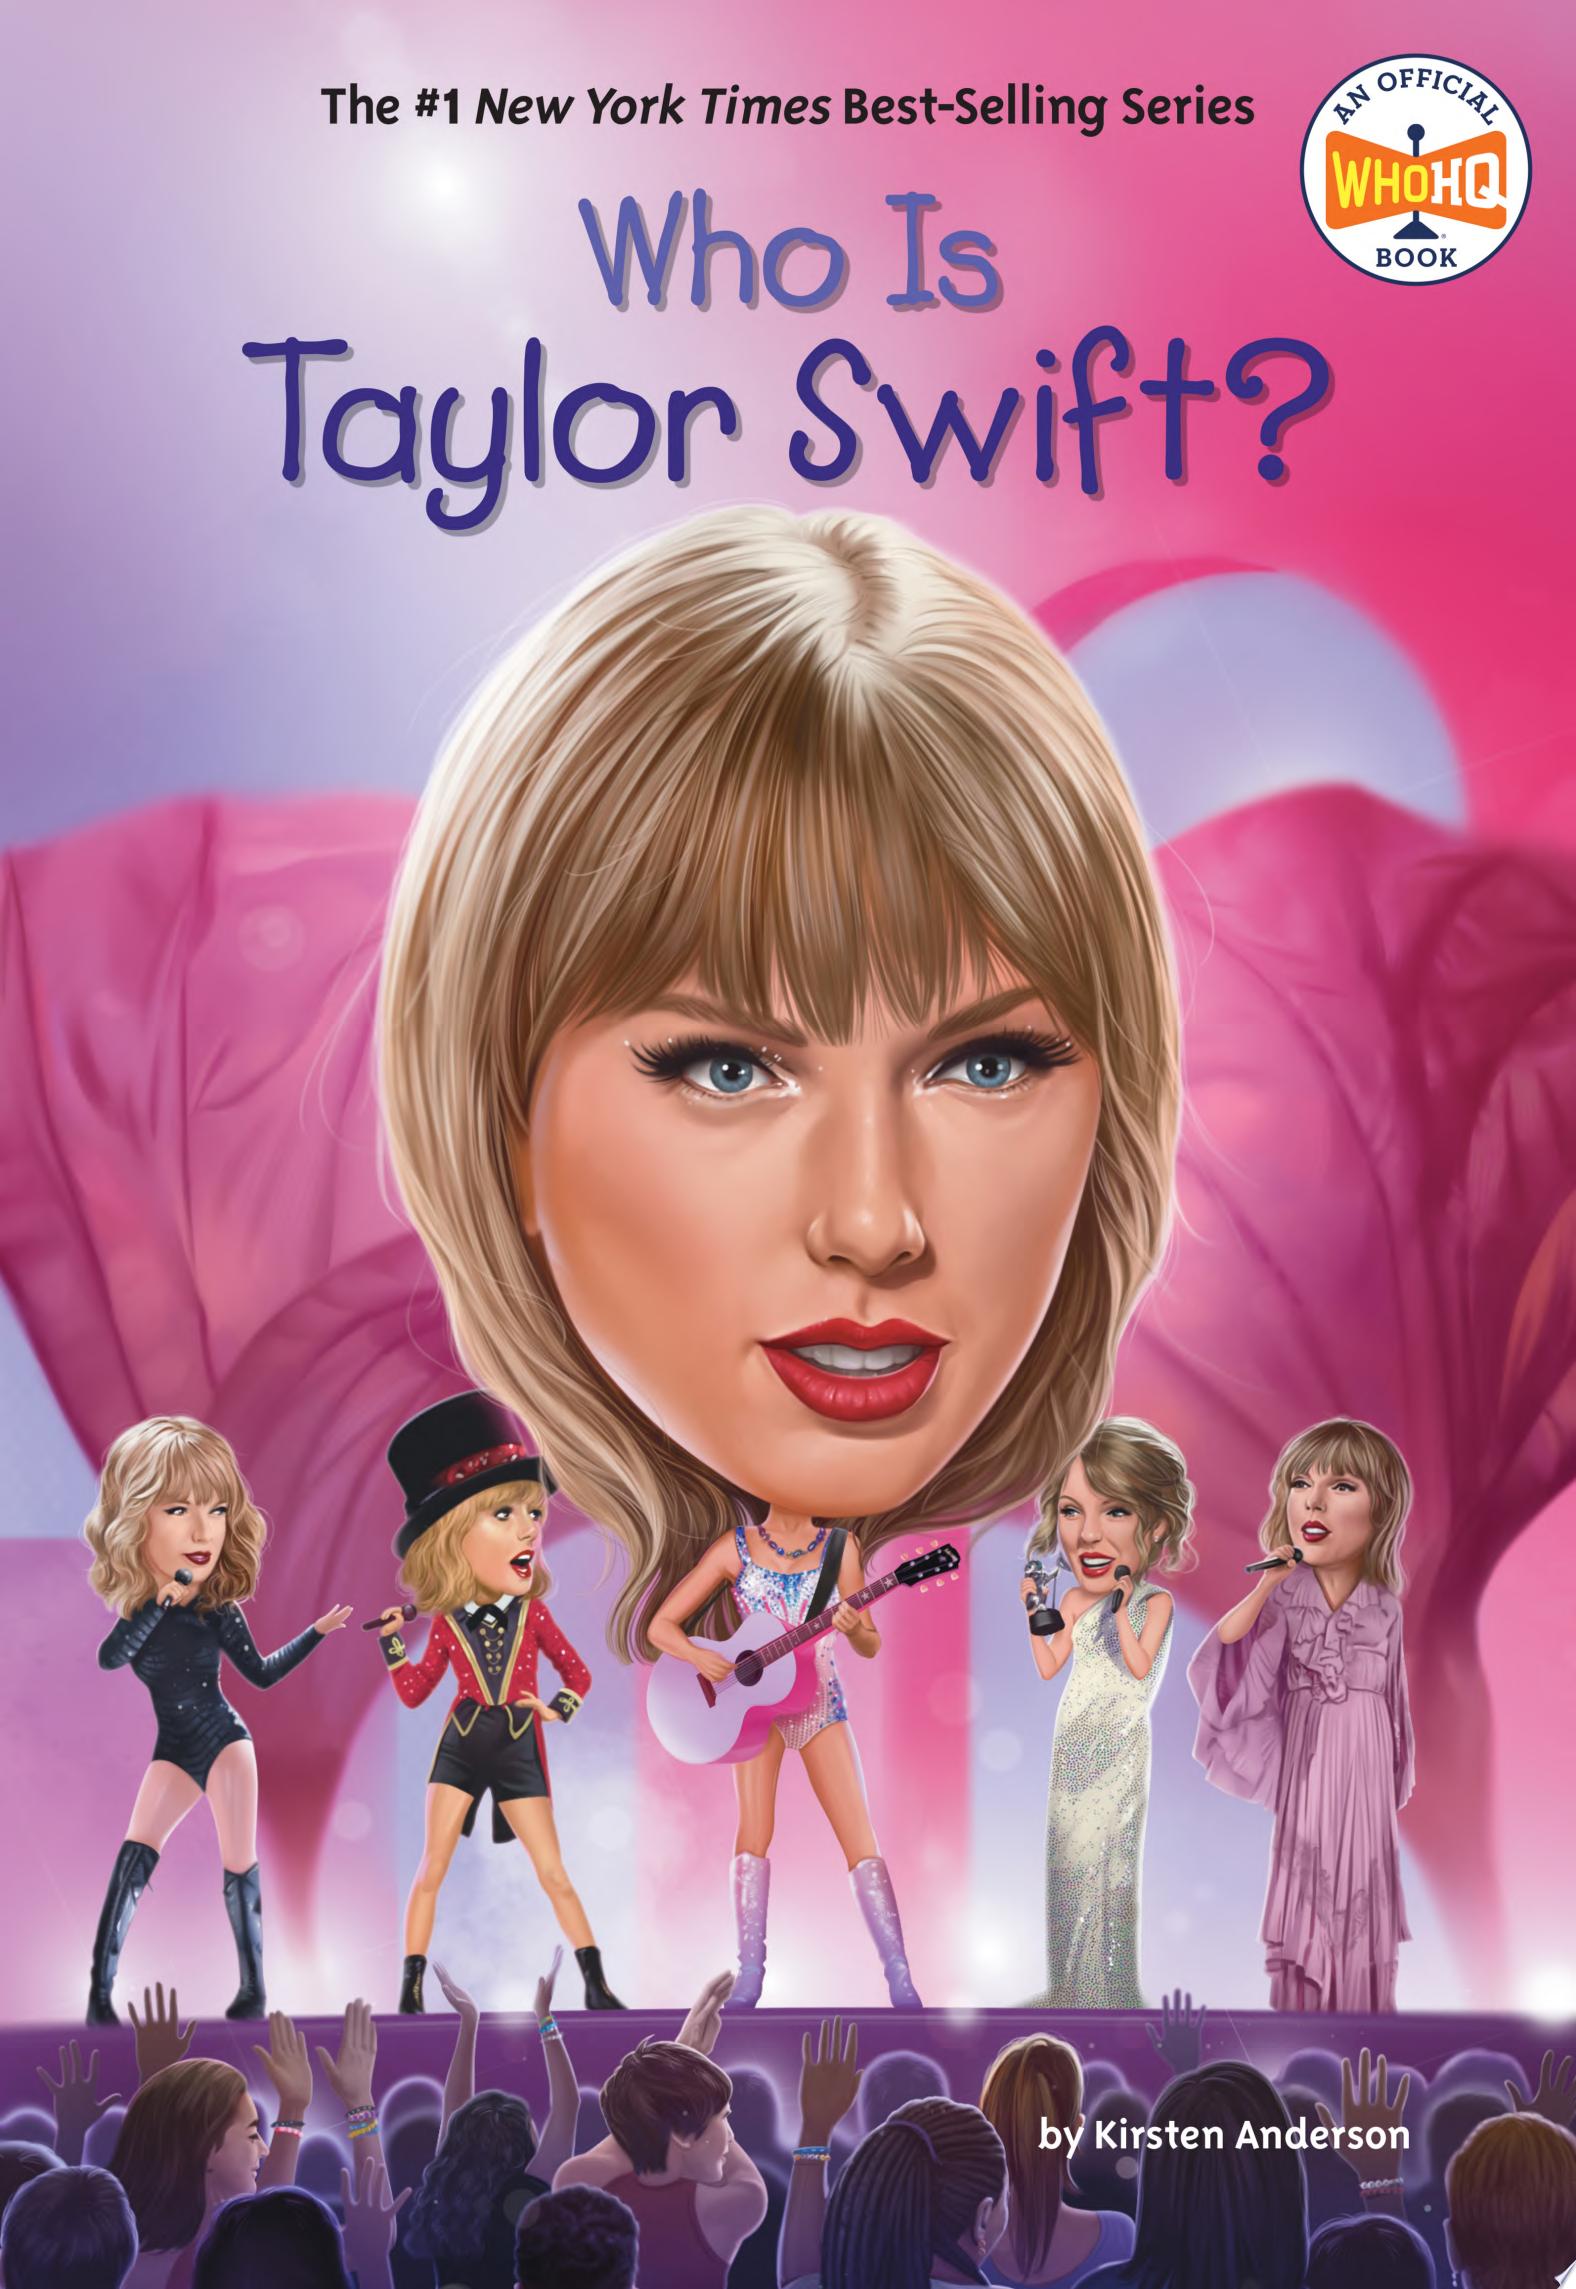 Image for "Who Is Taylor Swift?"